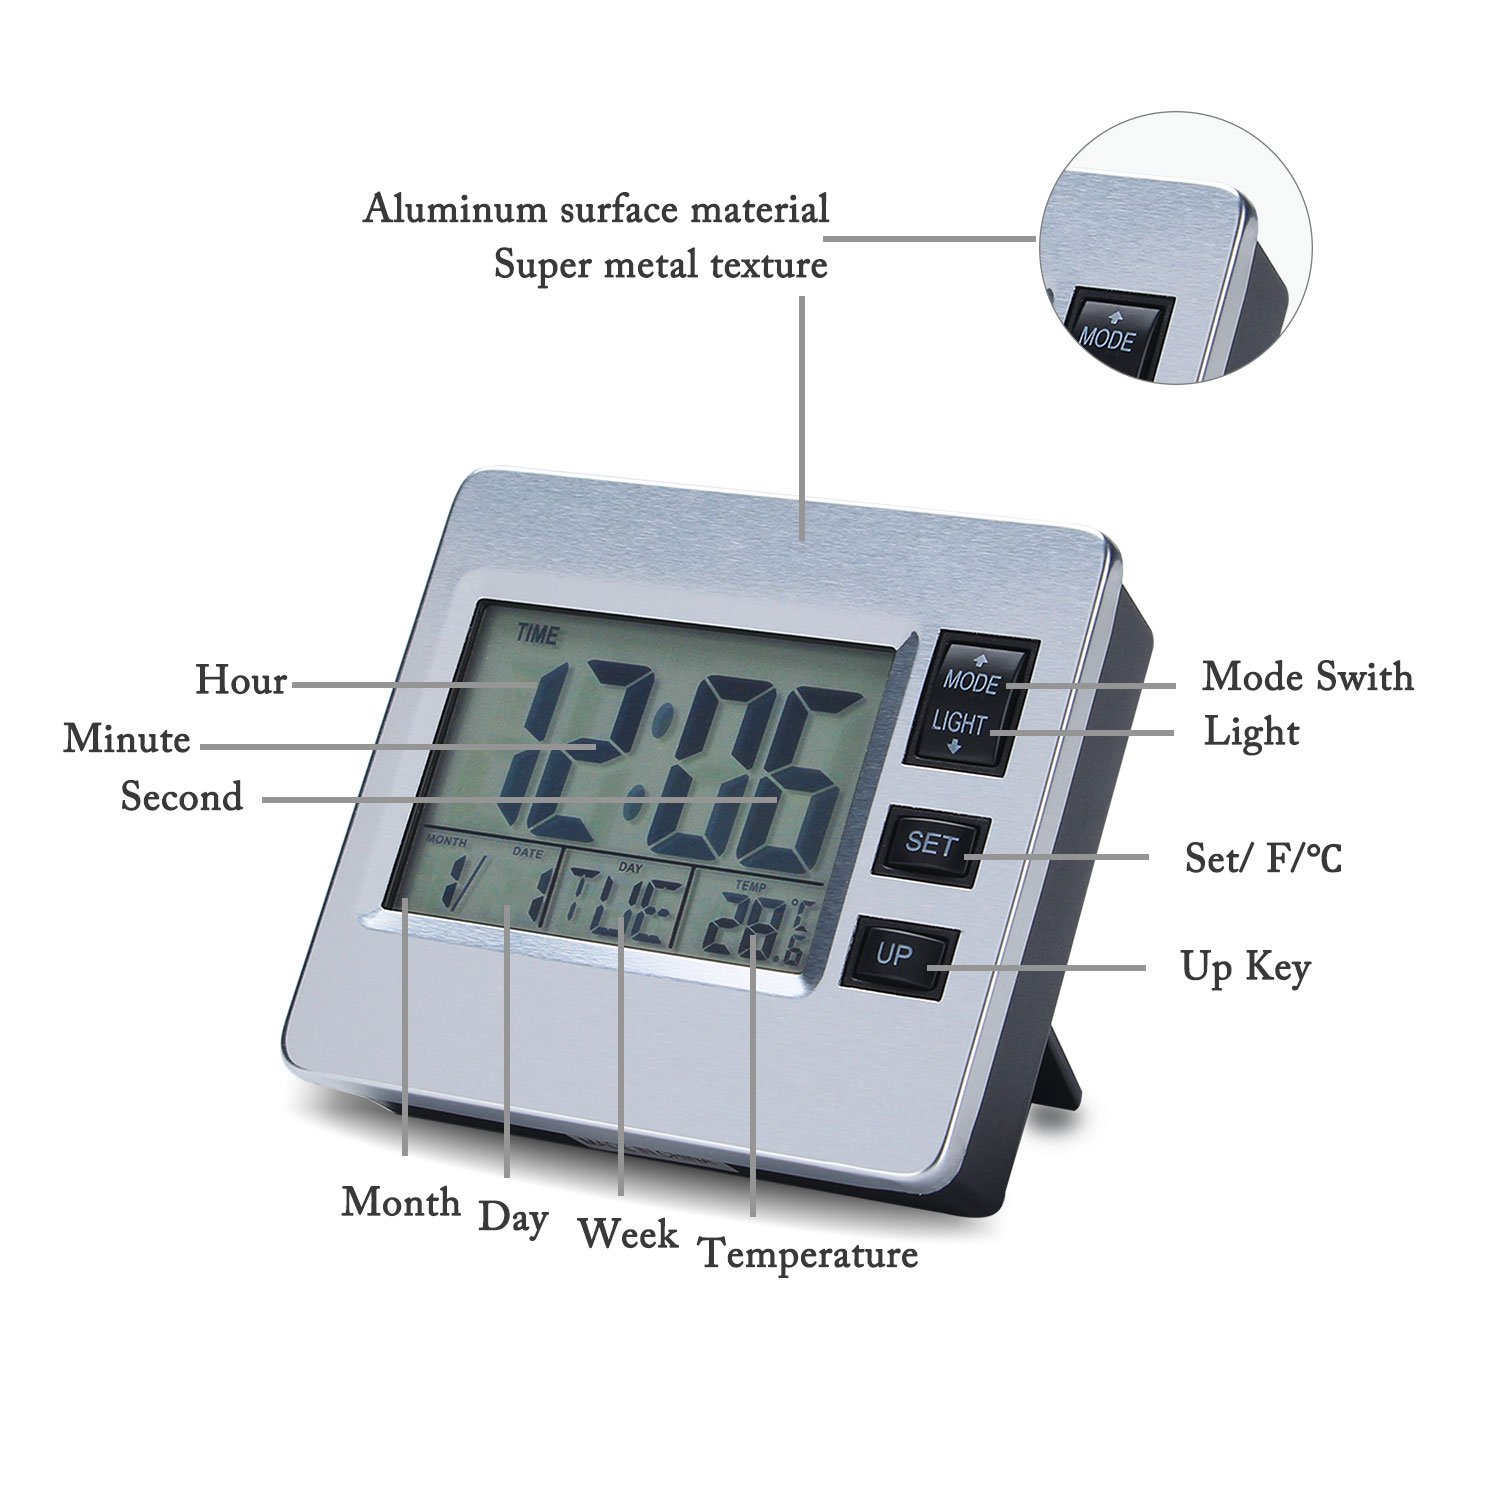 Digital Desk Clock Refrigerator Hood Kitchen Timer 12/24 Hour Alarm Date Week Indoor Thermometer LCD Backlight Clock Battery Operated Mute Hang on Wall Clock Table Room Office Senior